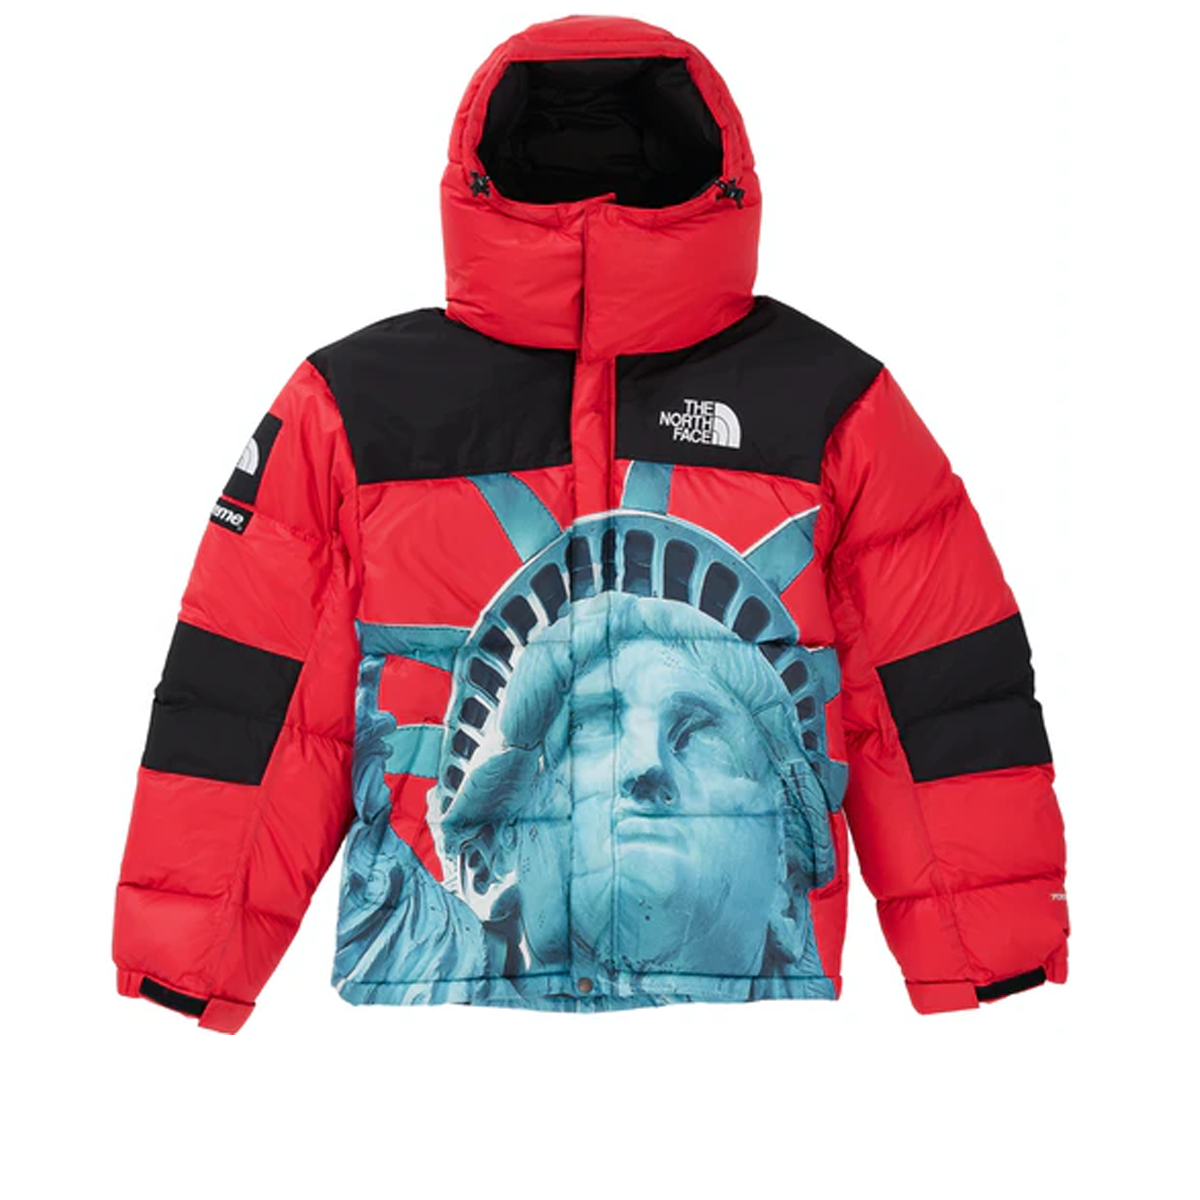 black north face jacket with red logo